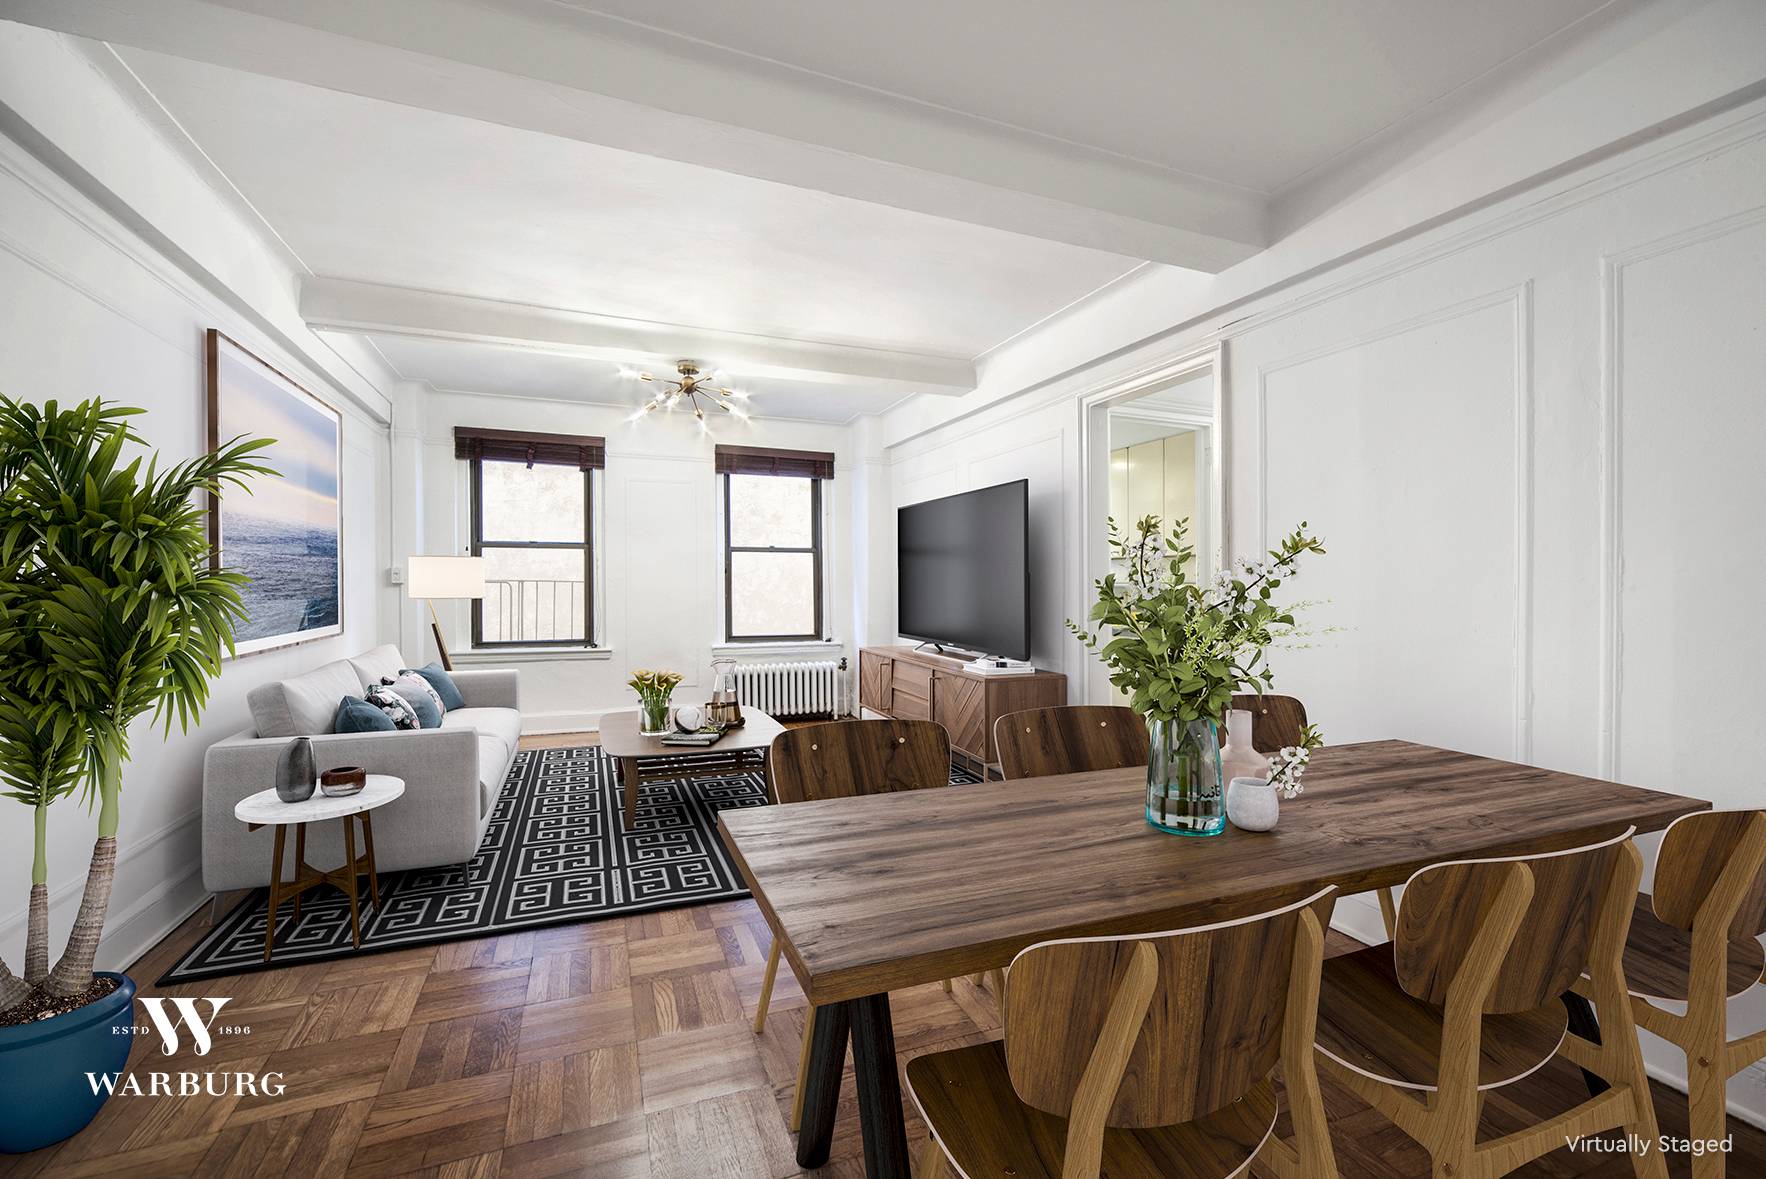 Welcome to apartment 3D. This large 1 bedroom in the heart of Greenwich Village is calling your name.